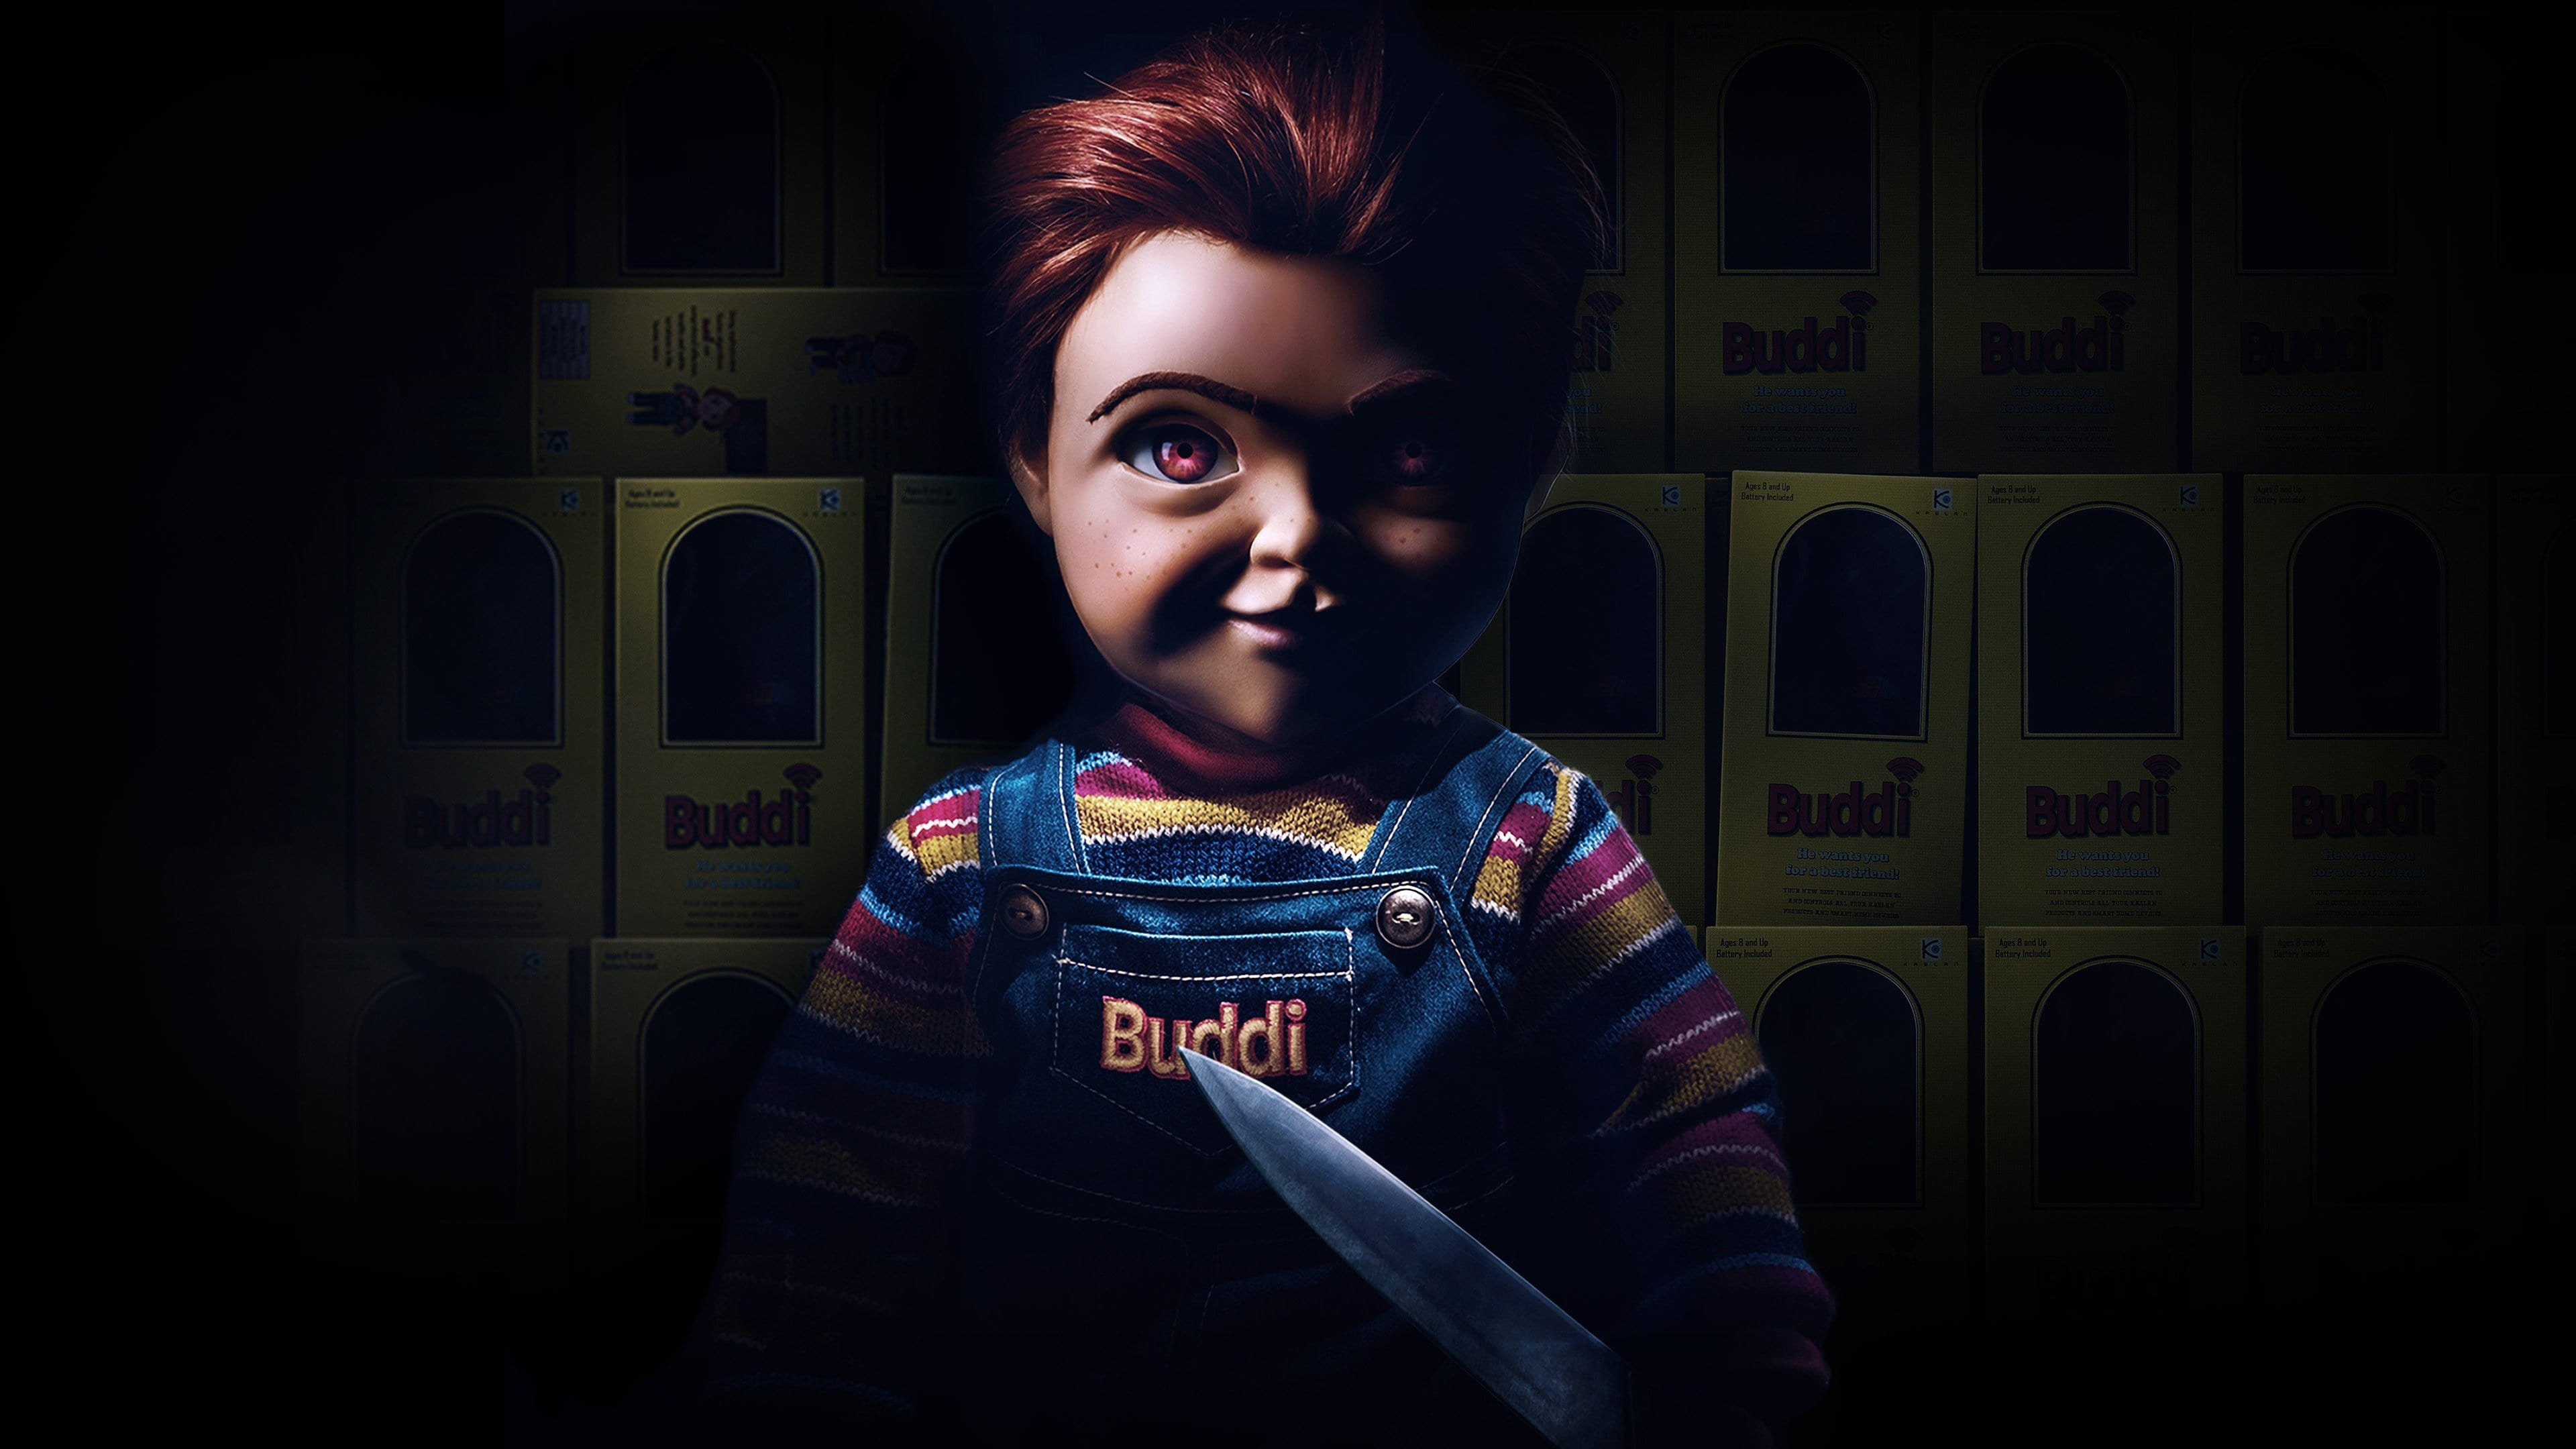 Child’s Play 2019 Soap2Day